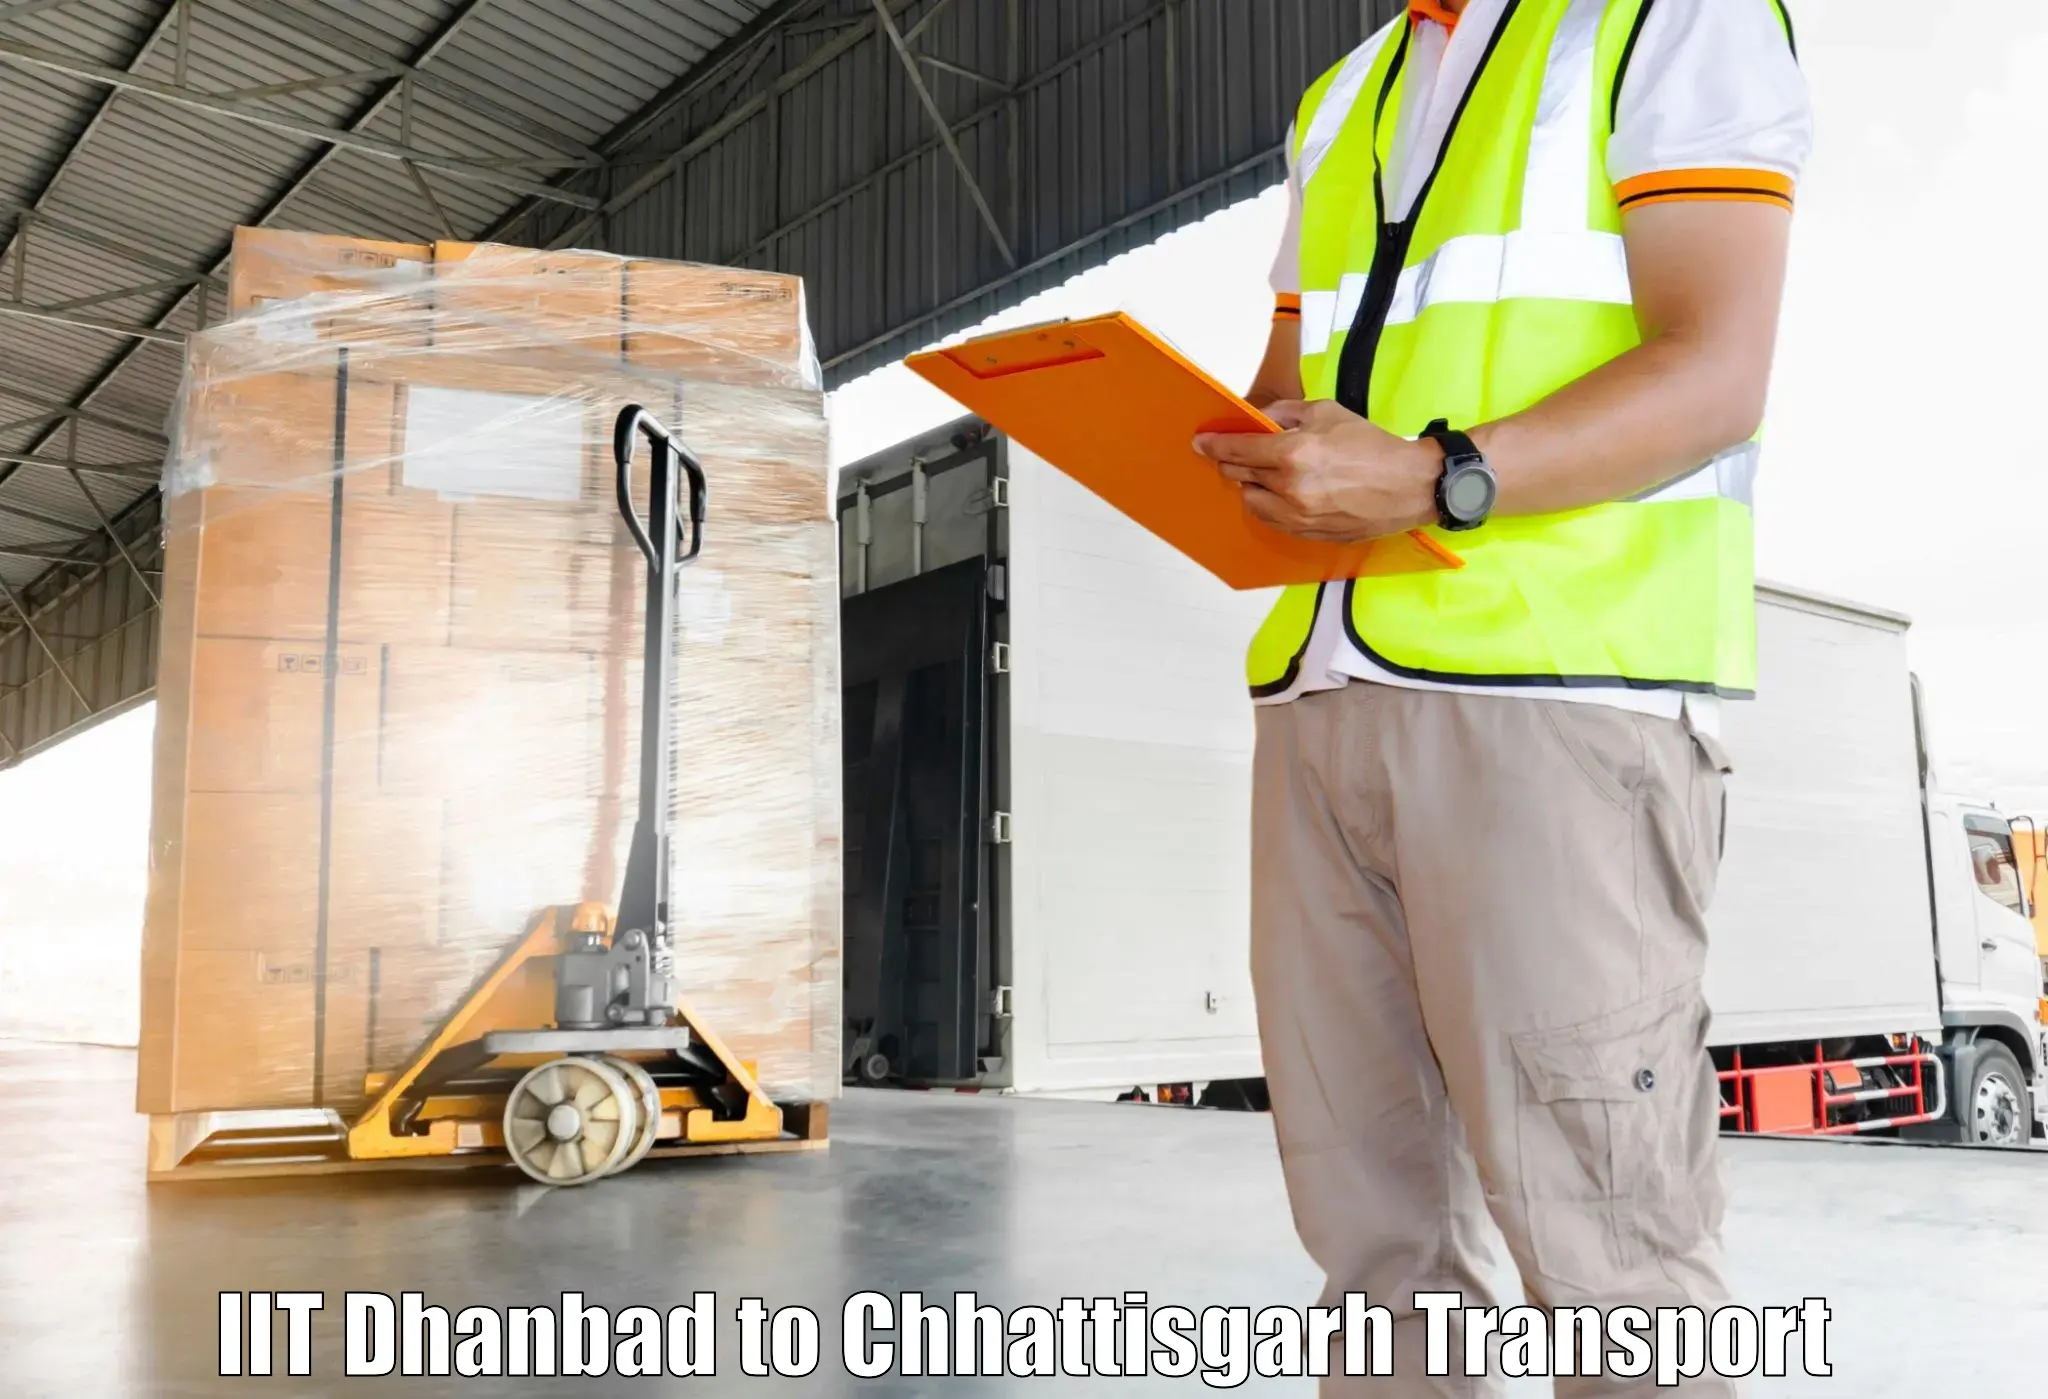 Online transport service IIT Dhanbad to Gariaband